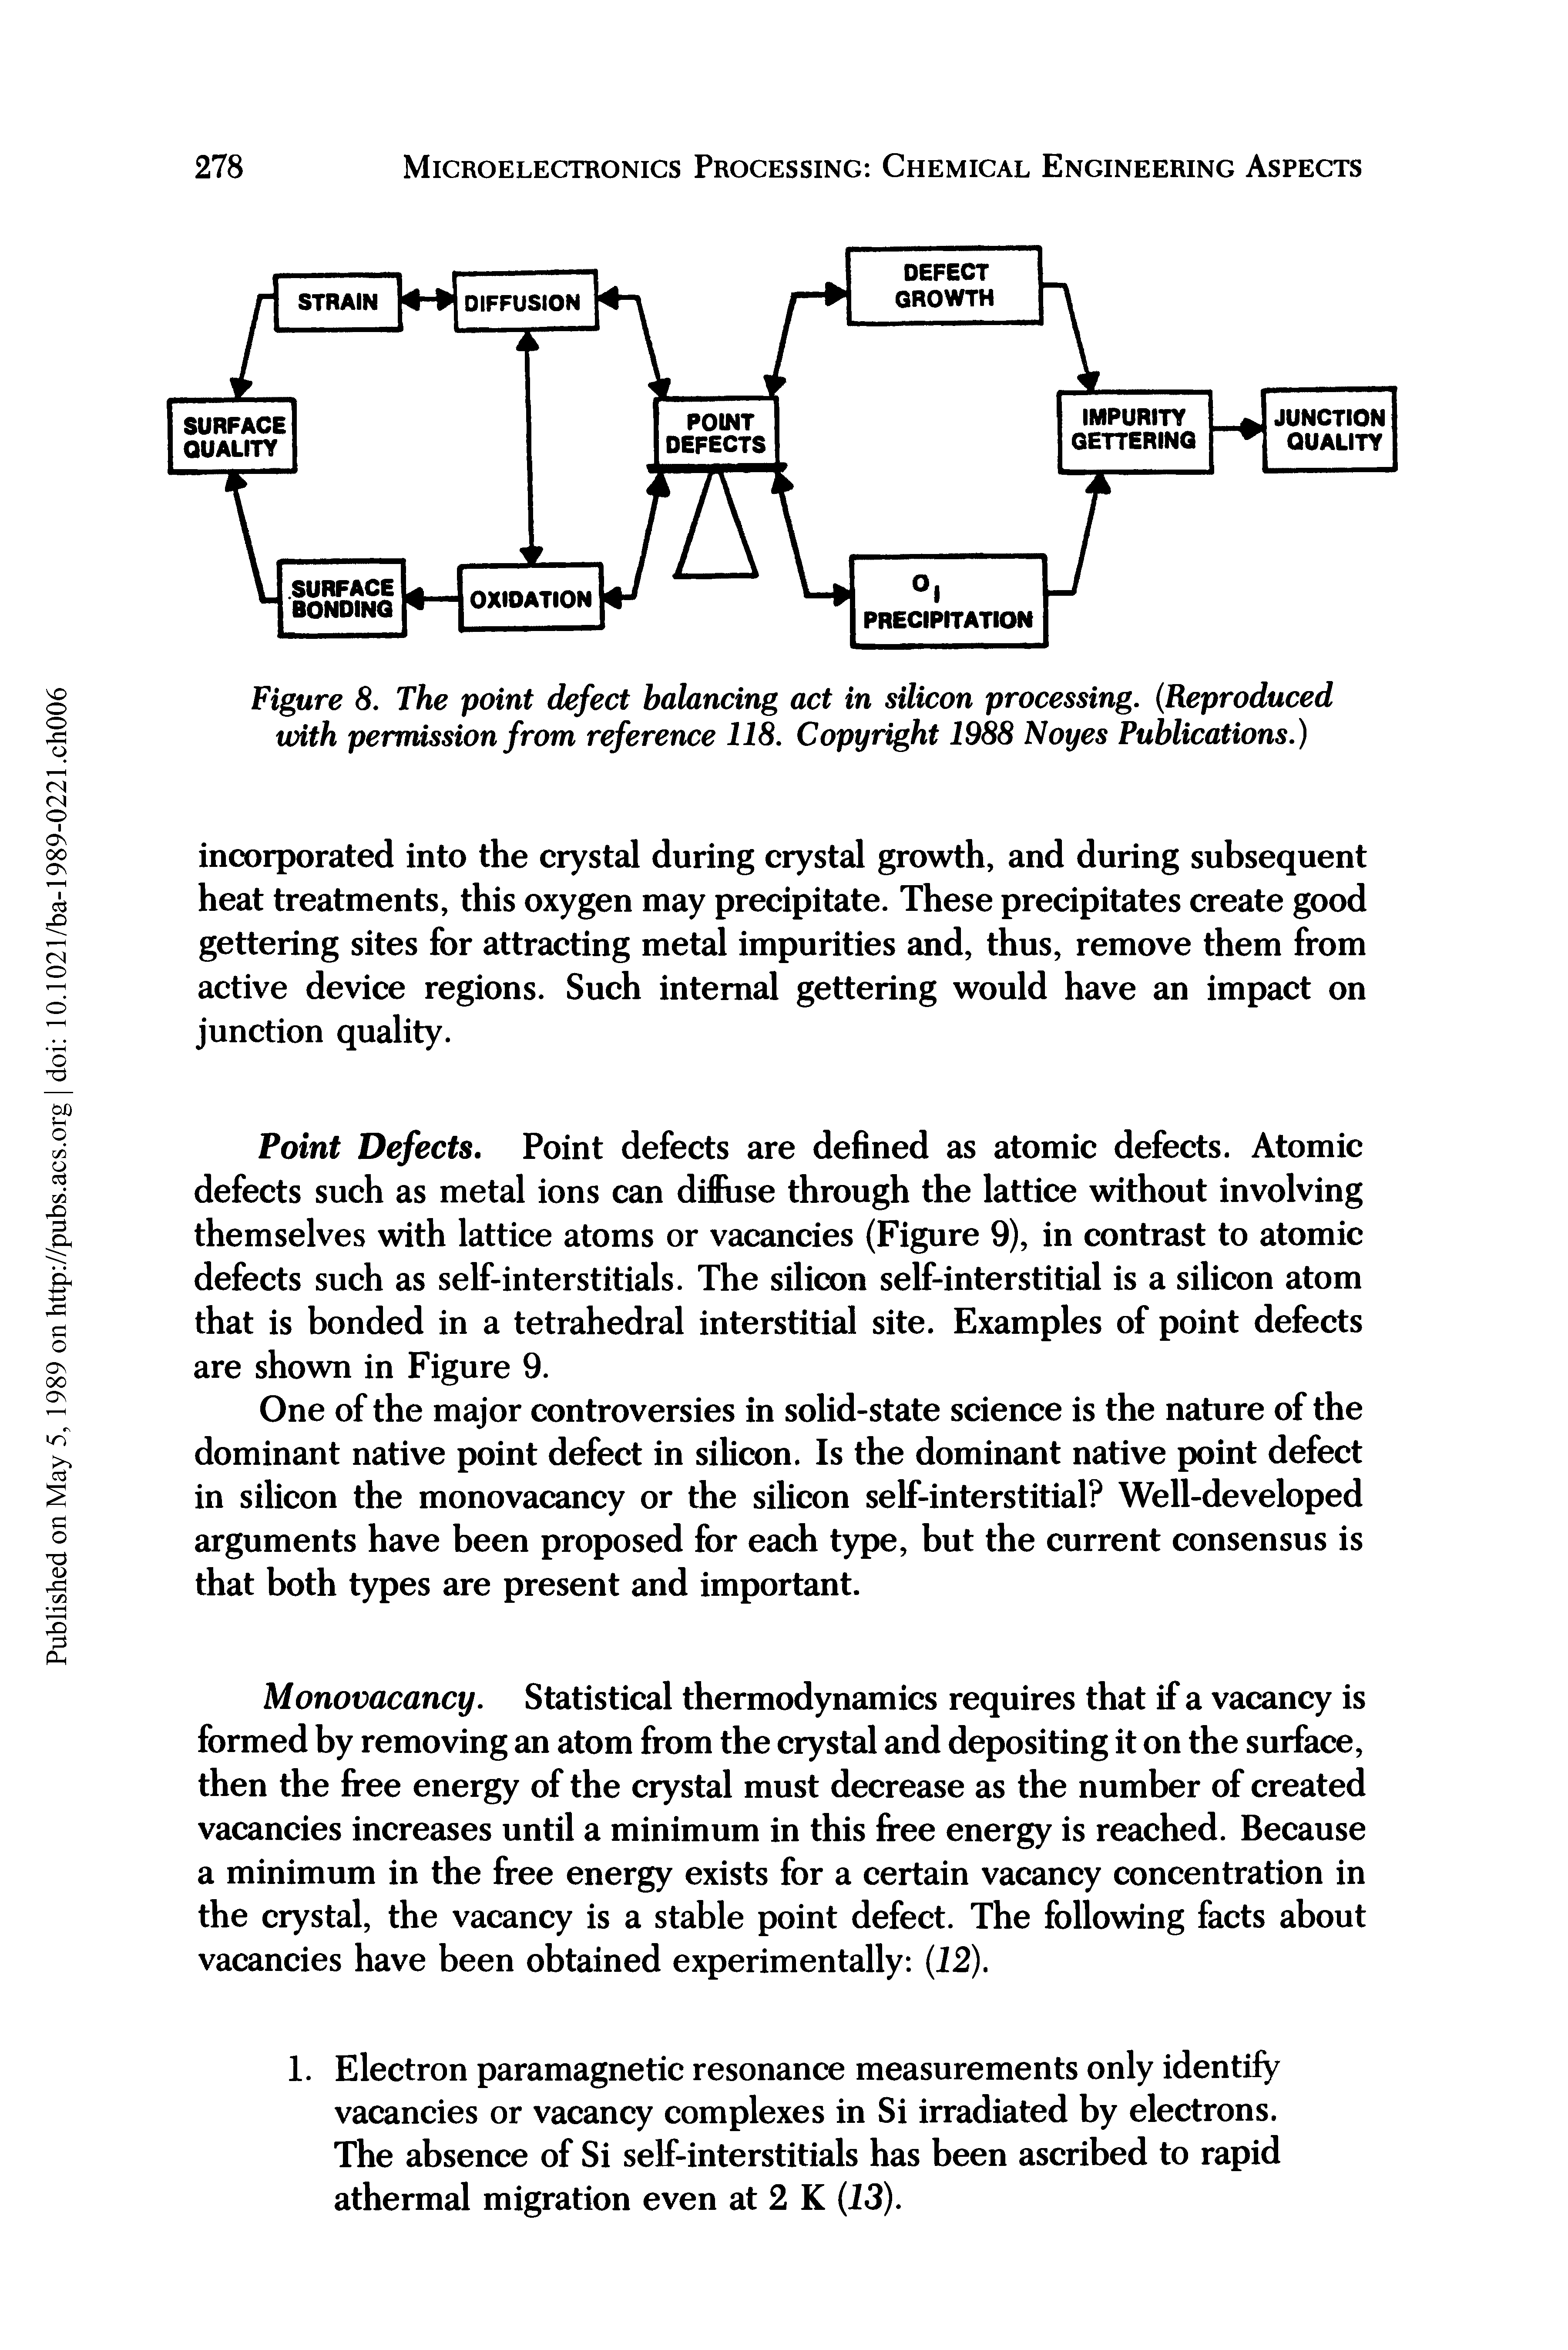 Figure 8. The point defect balancing act in silicon processing. (Reproduced with permission from reference 118. Copyright 1988 Noyes Publications.)...